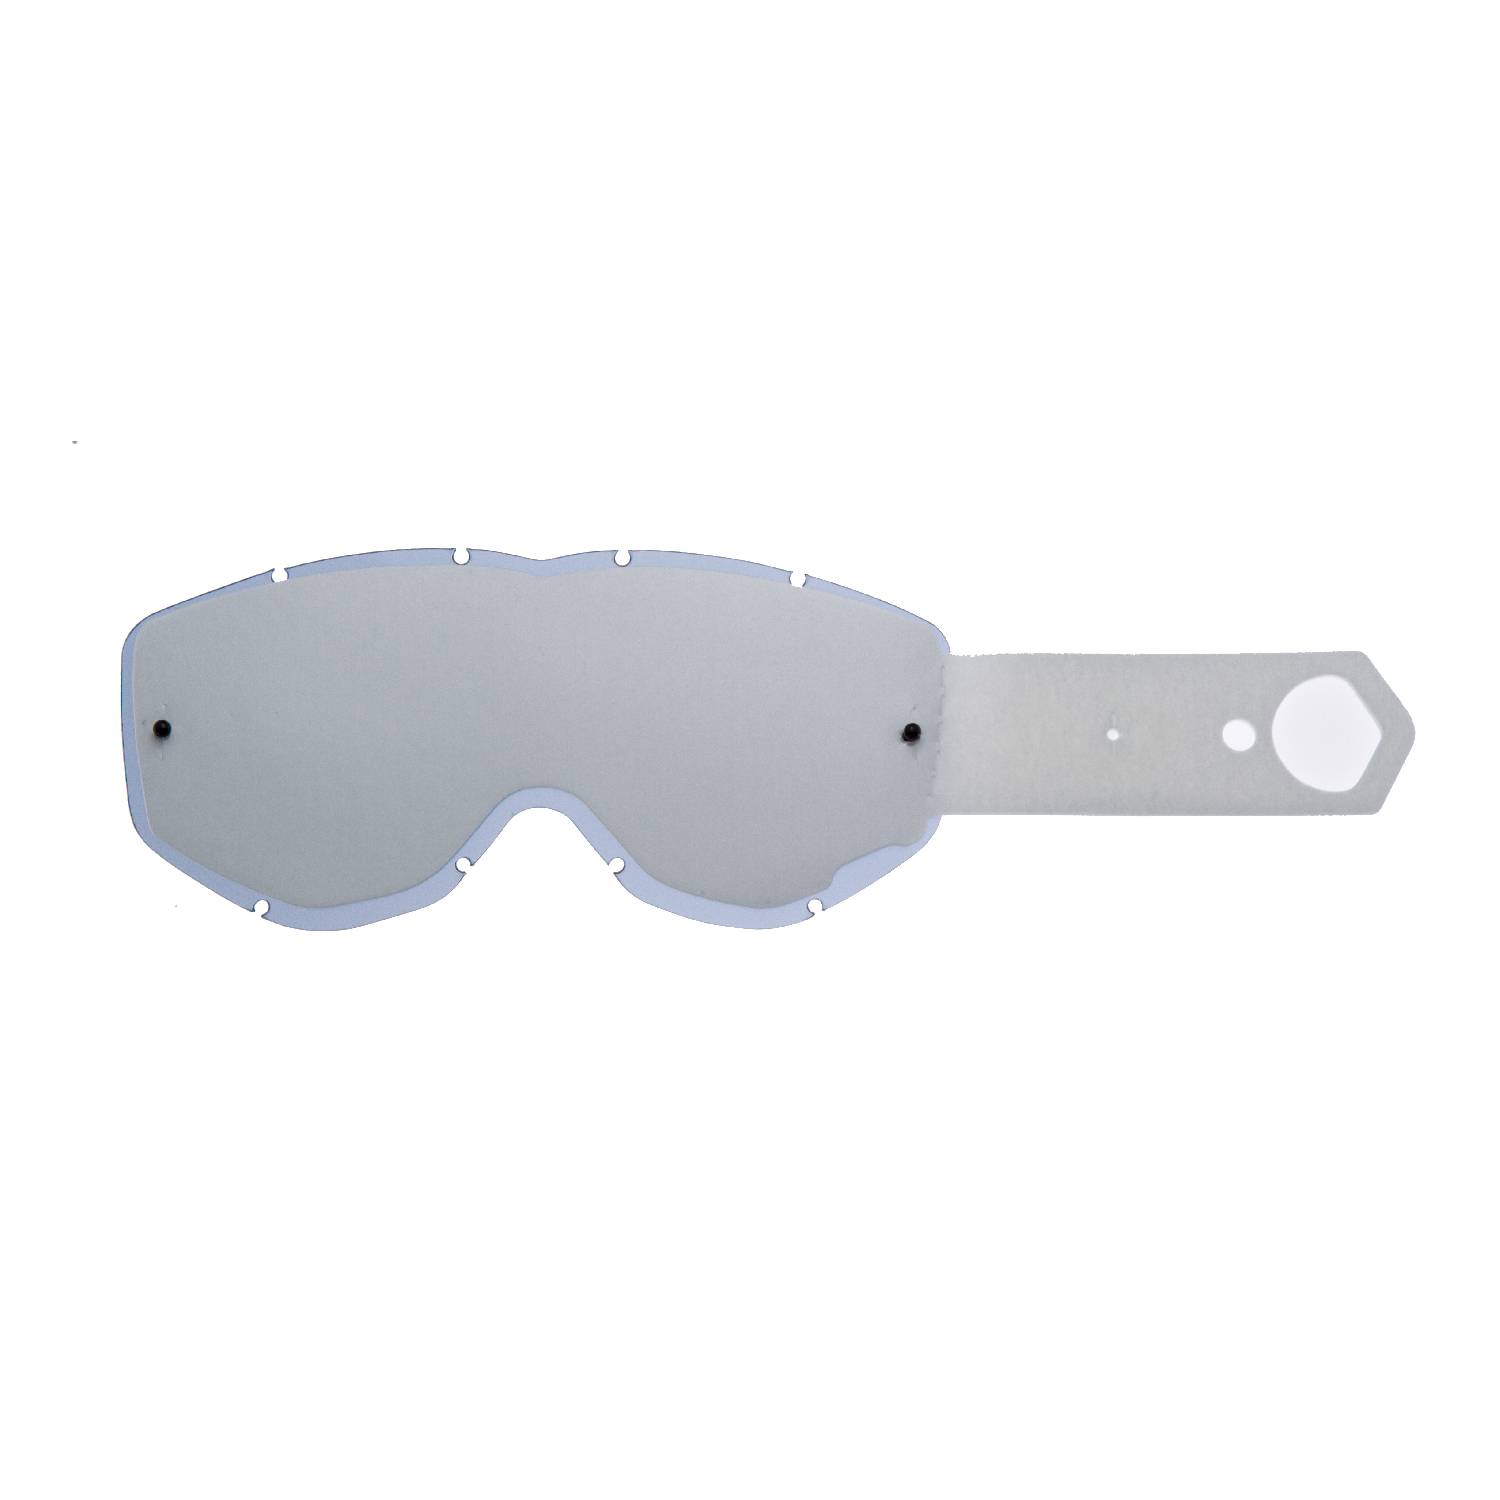 combo lenses with smokey lenses with 10 tear off compatible for Spy Magneto goggle